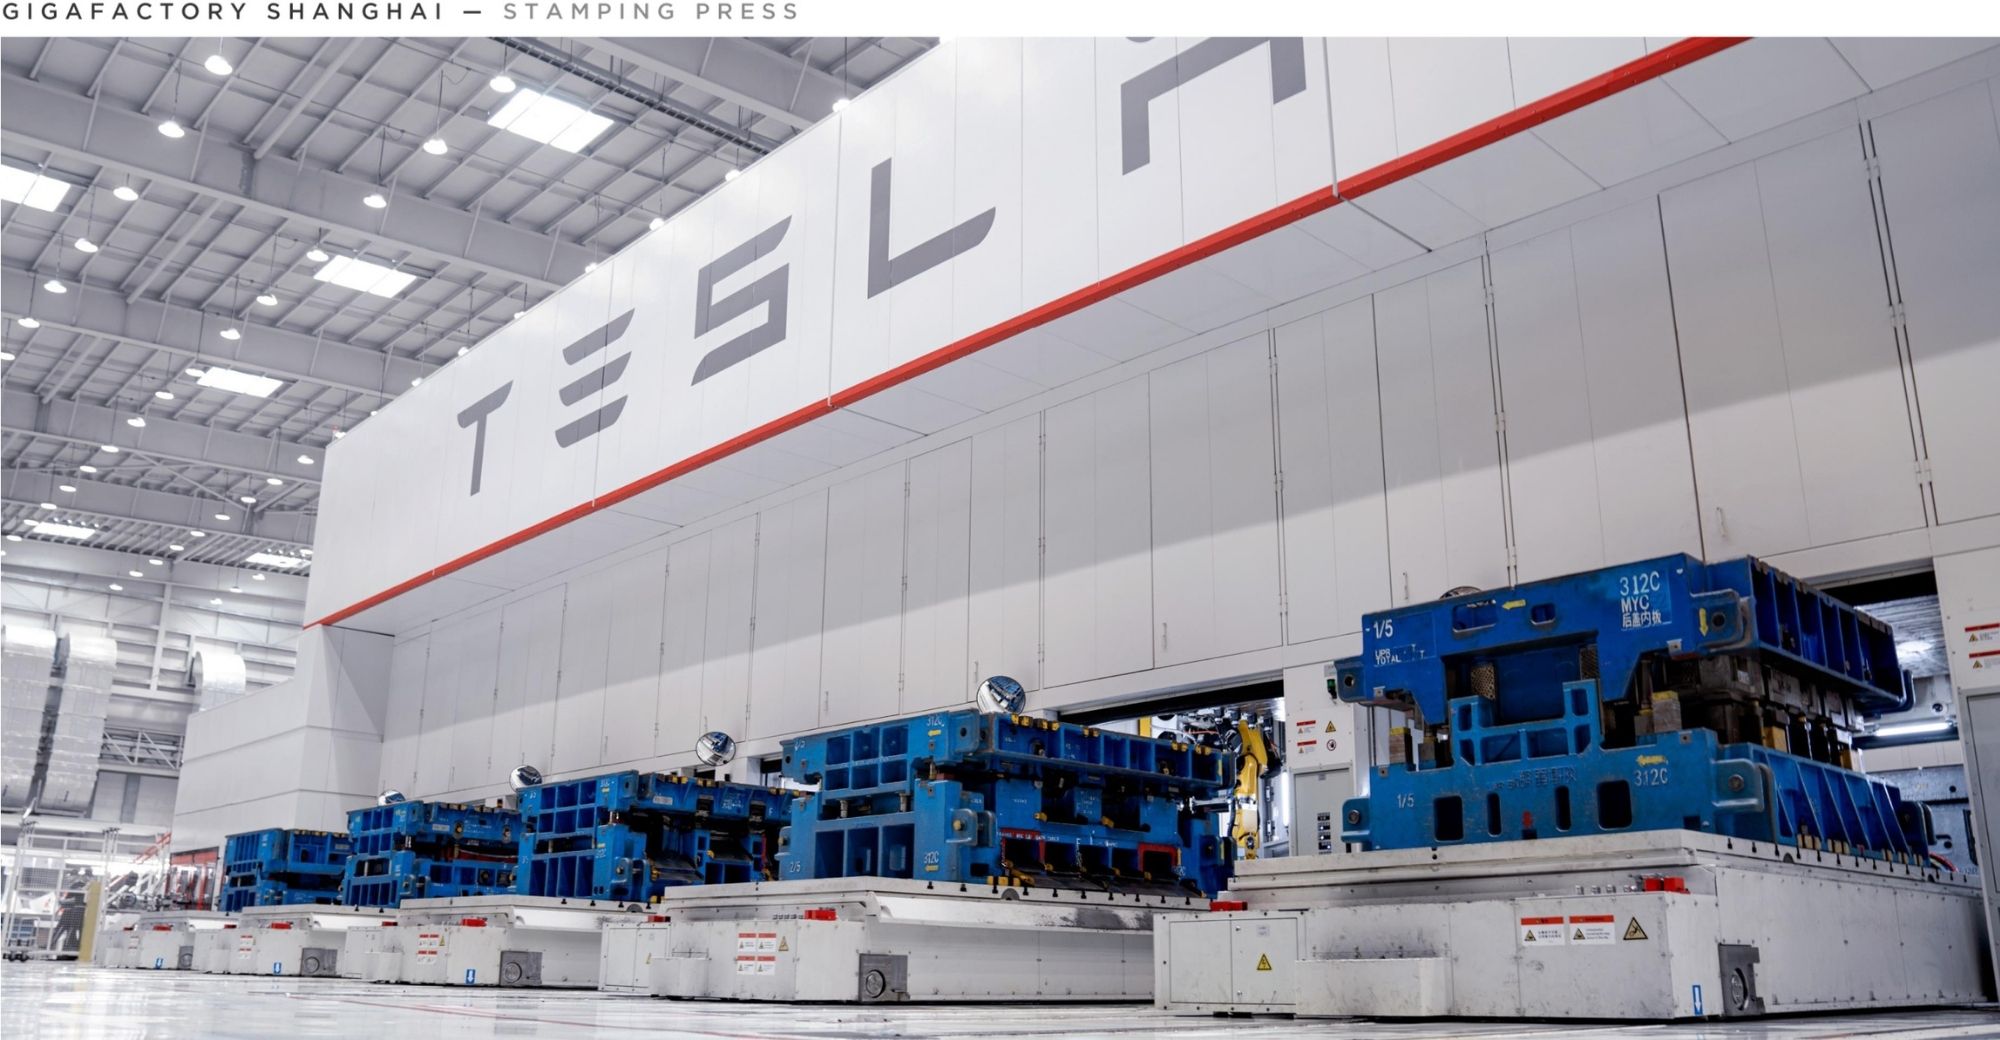 Tesla’s 5 Millionth Vehicle Globally Rolls off the Production Line in Shanghai